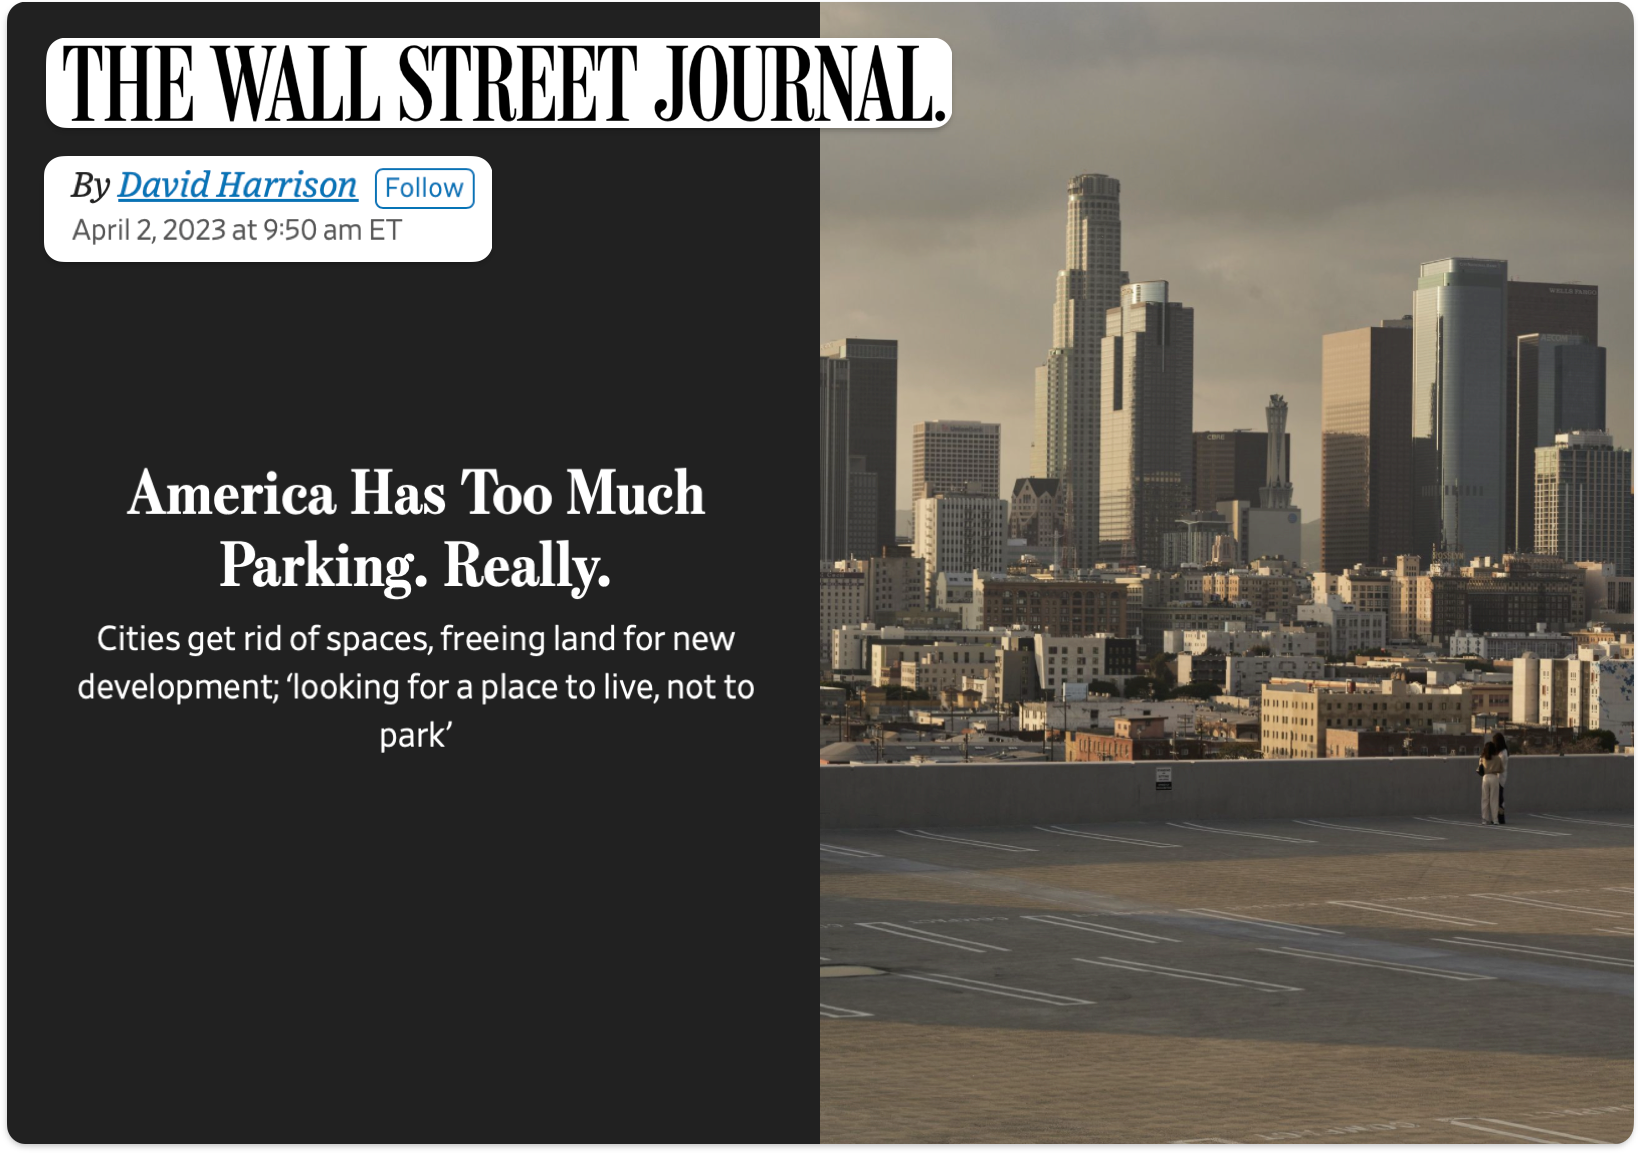 Wall Street Journal about Parking space